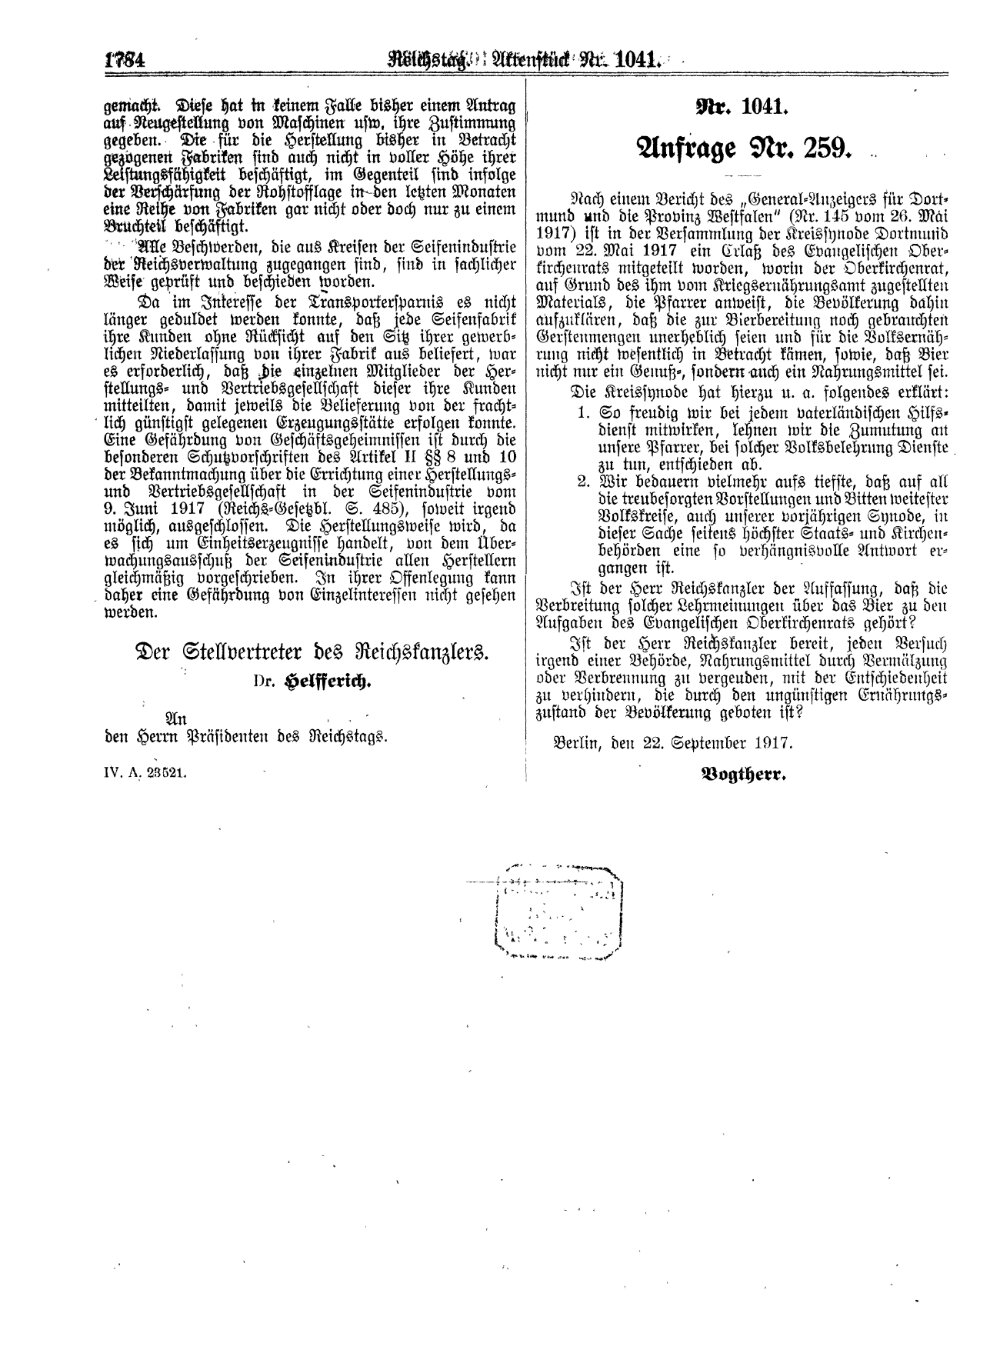 Scan of page 1784